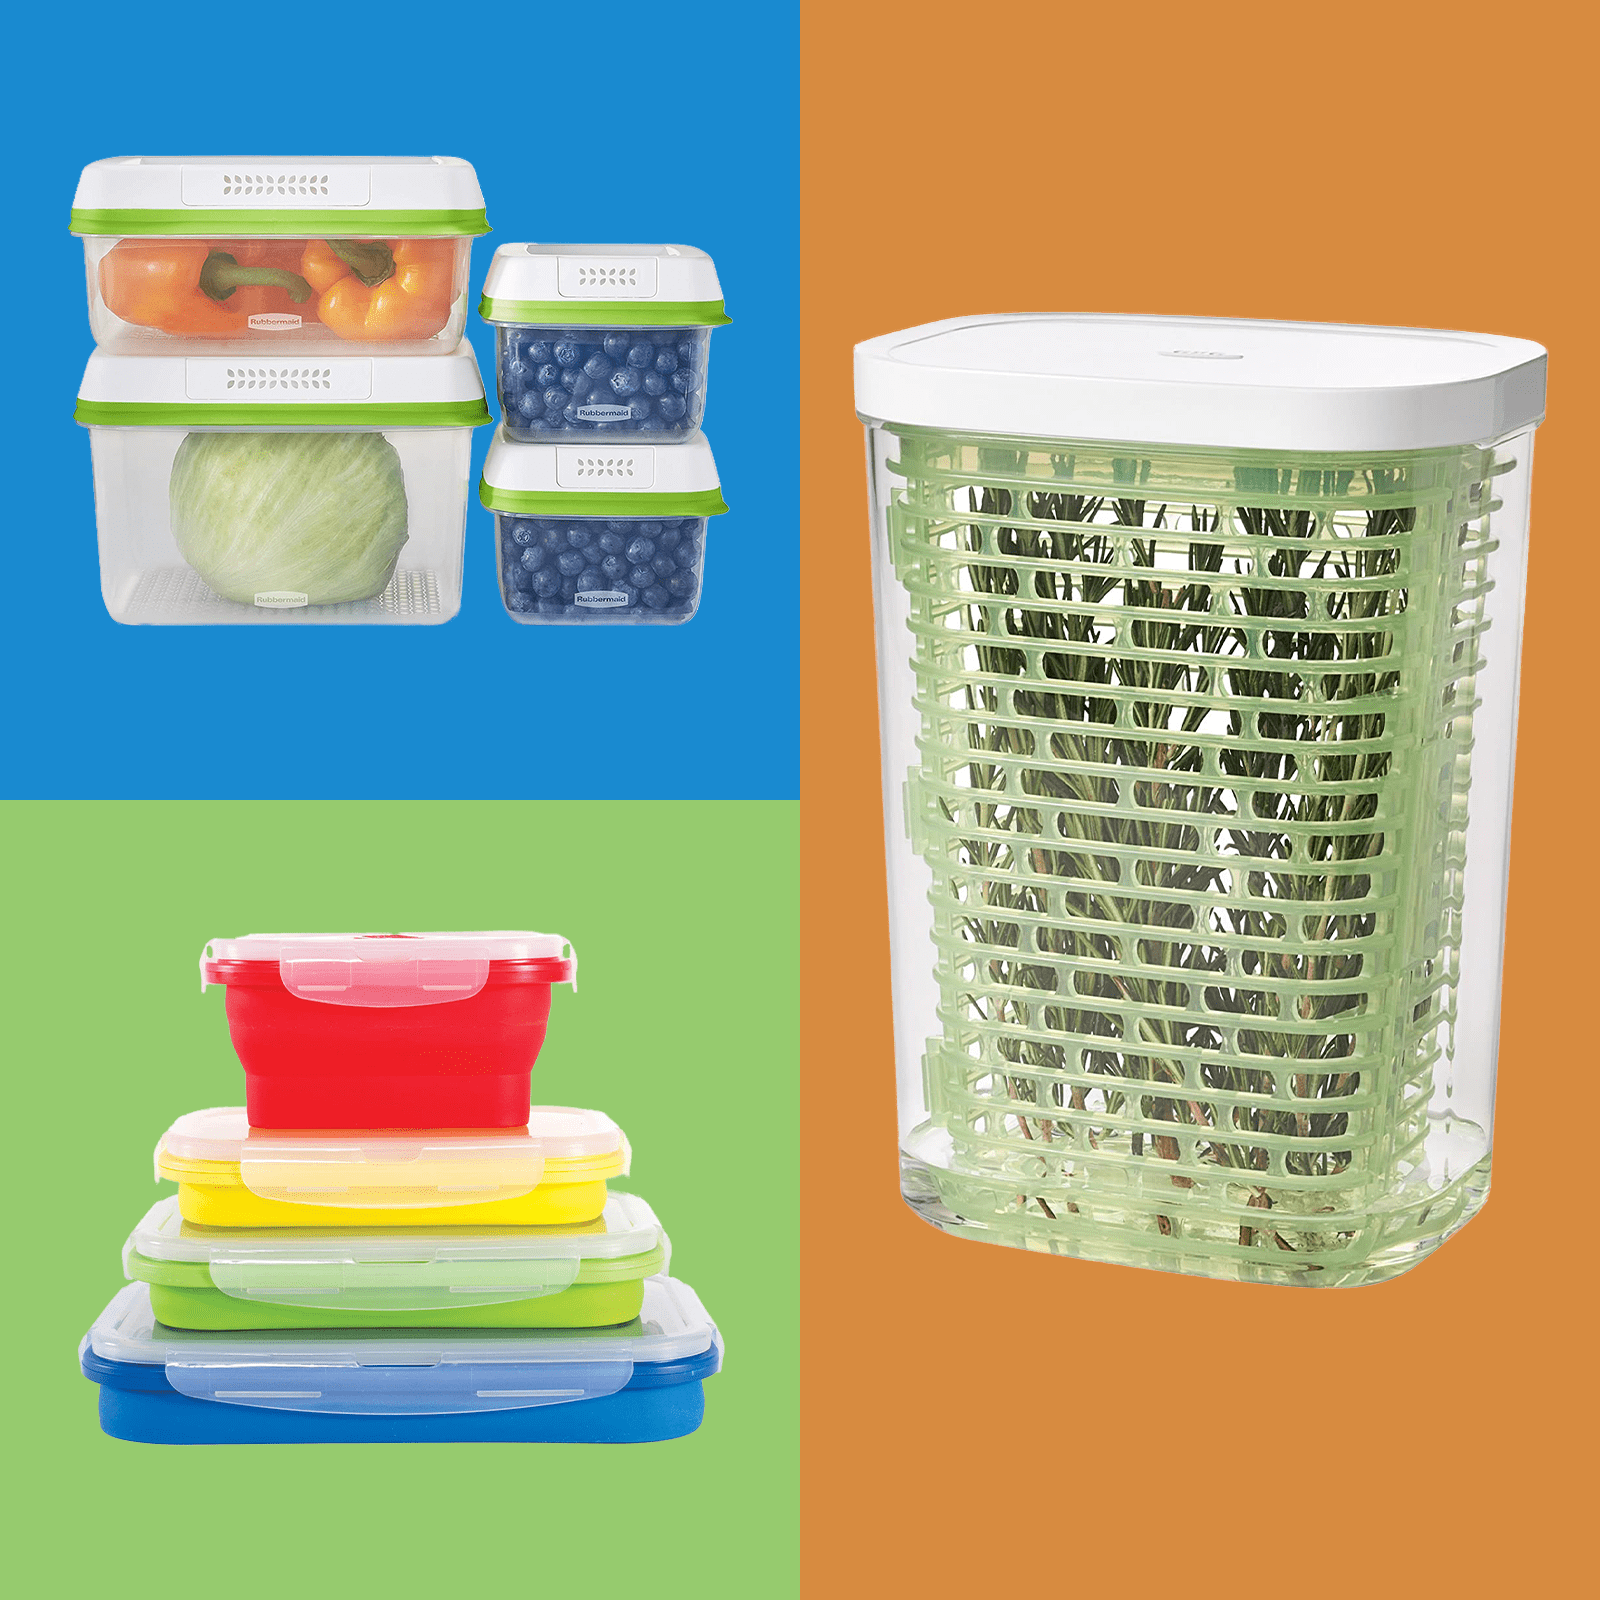 https://www.rd.com/wp-content/uploads/2022/11/10-best-food-storage-containers-ft-via-merchant.png